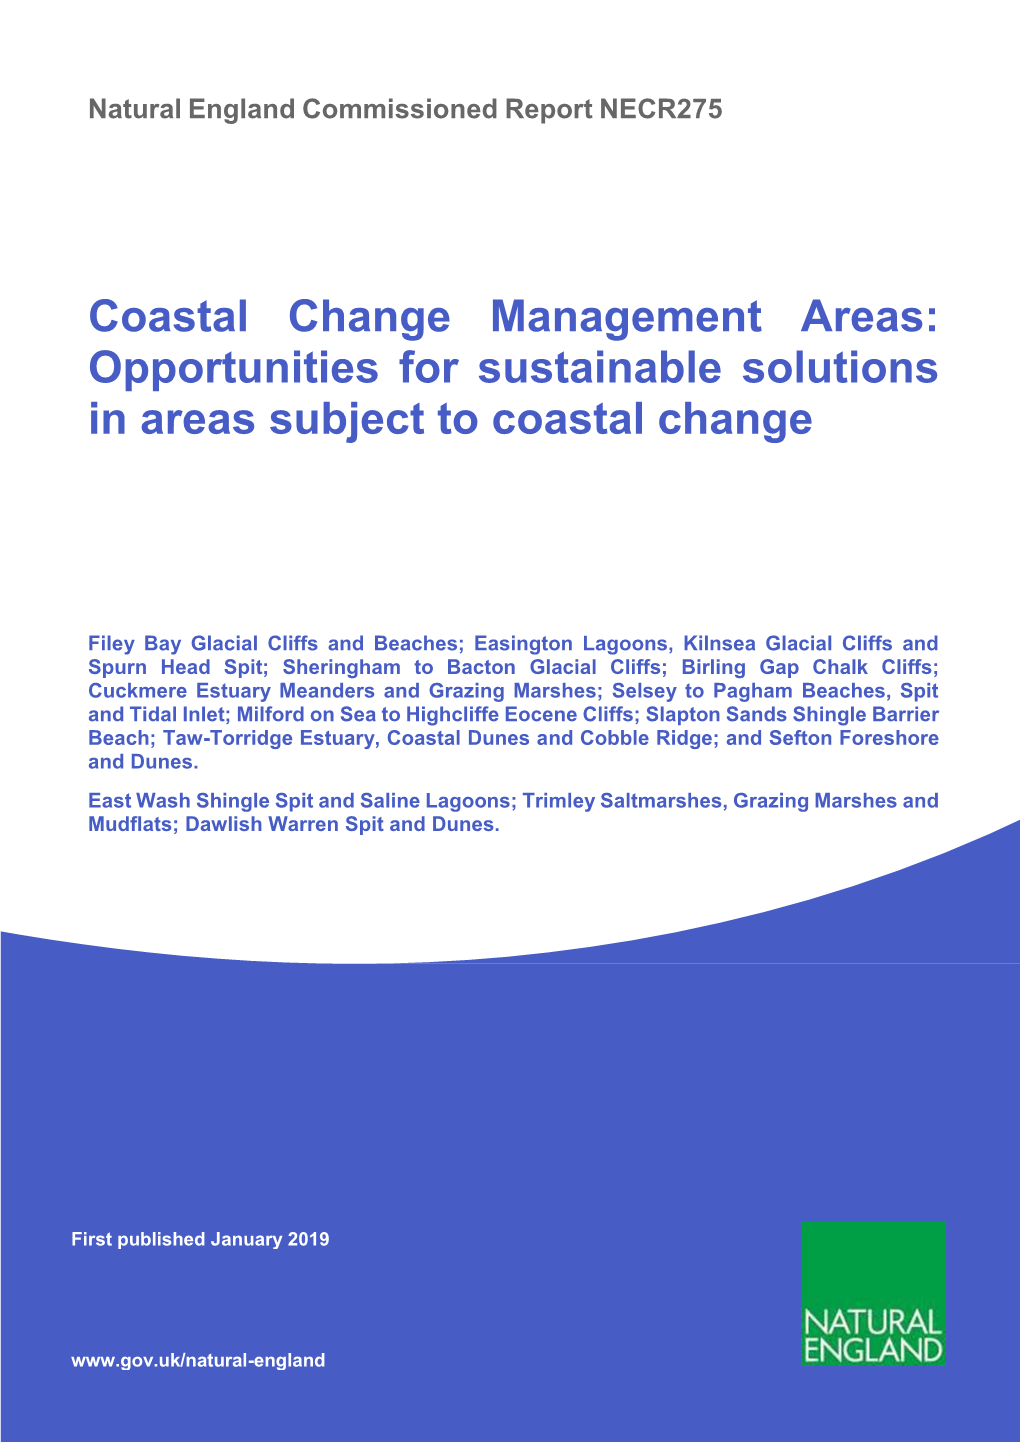 Opportunities for Sustainable Solutions in Areas Subject to Coastal Change